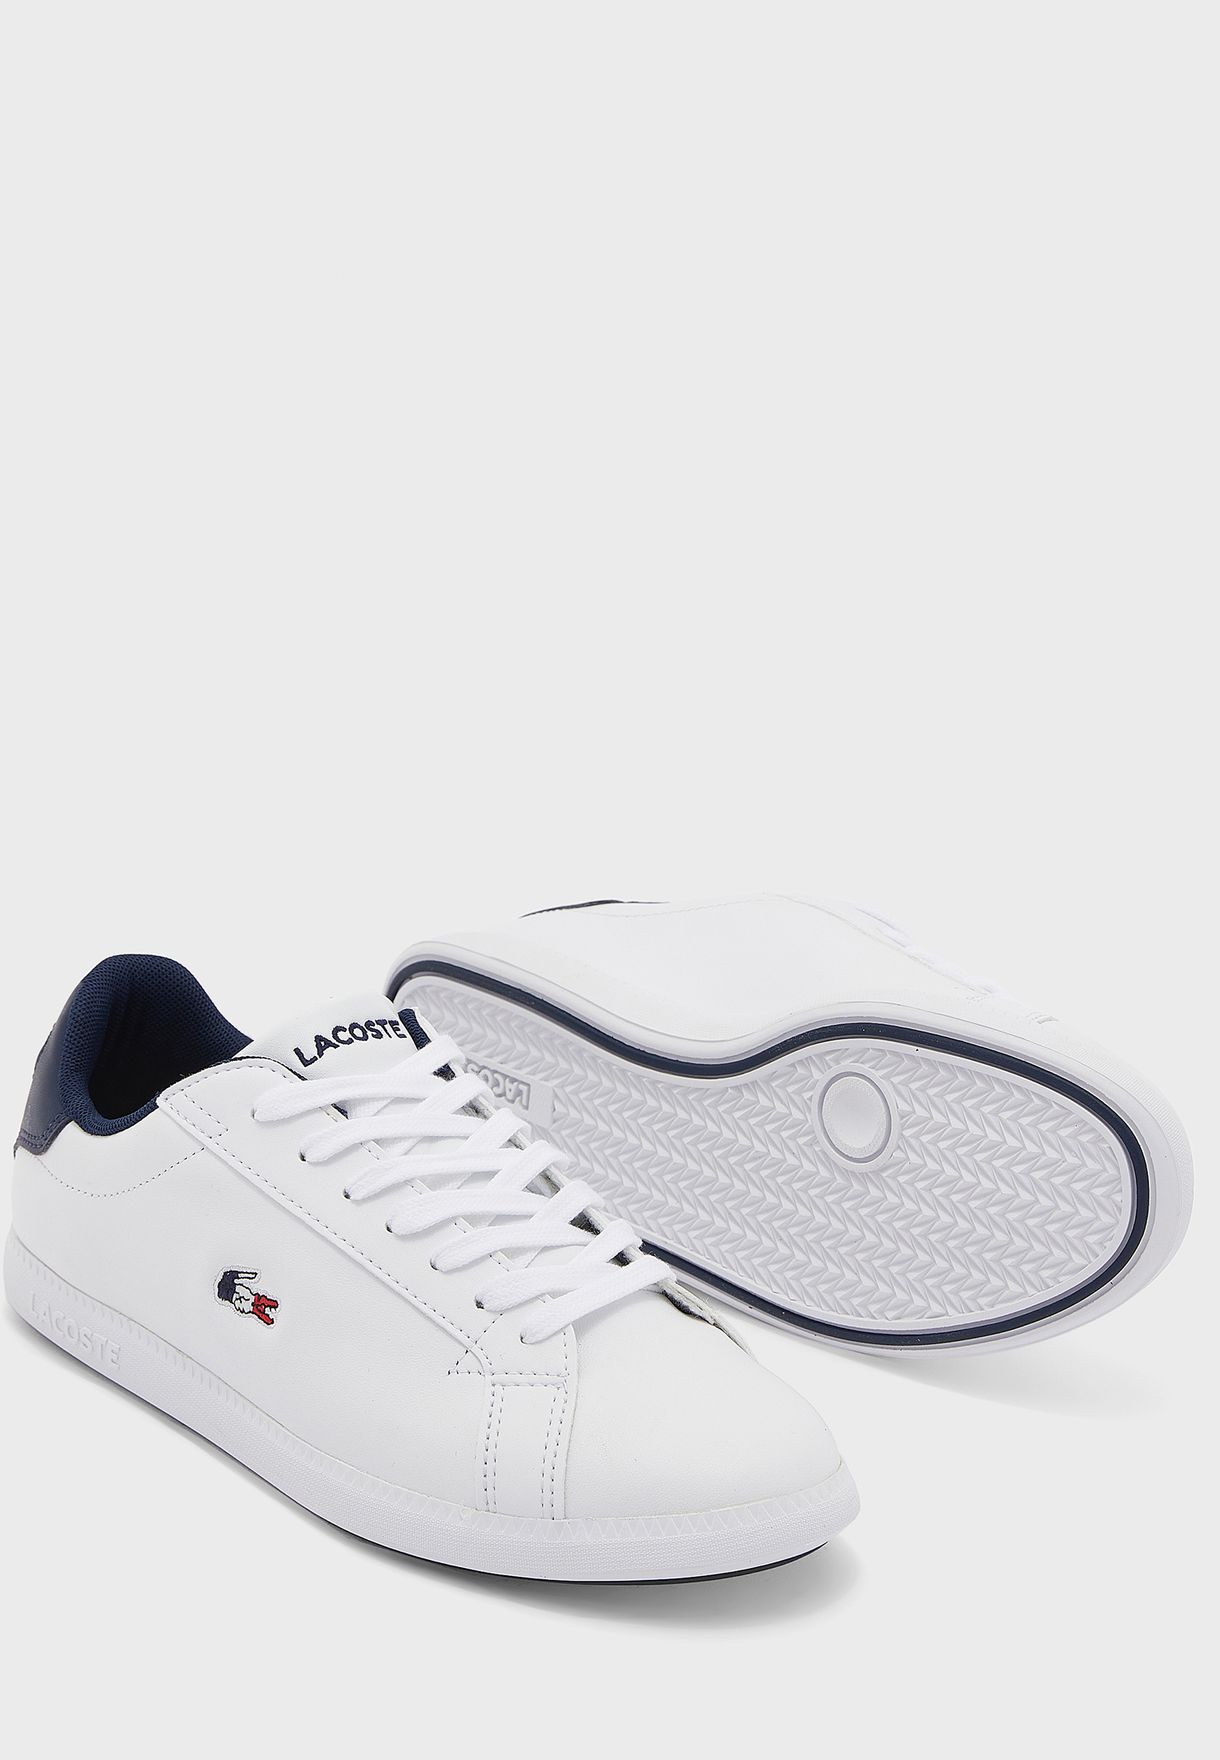 Graduate Tricolor Leather Sneakers